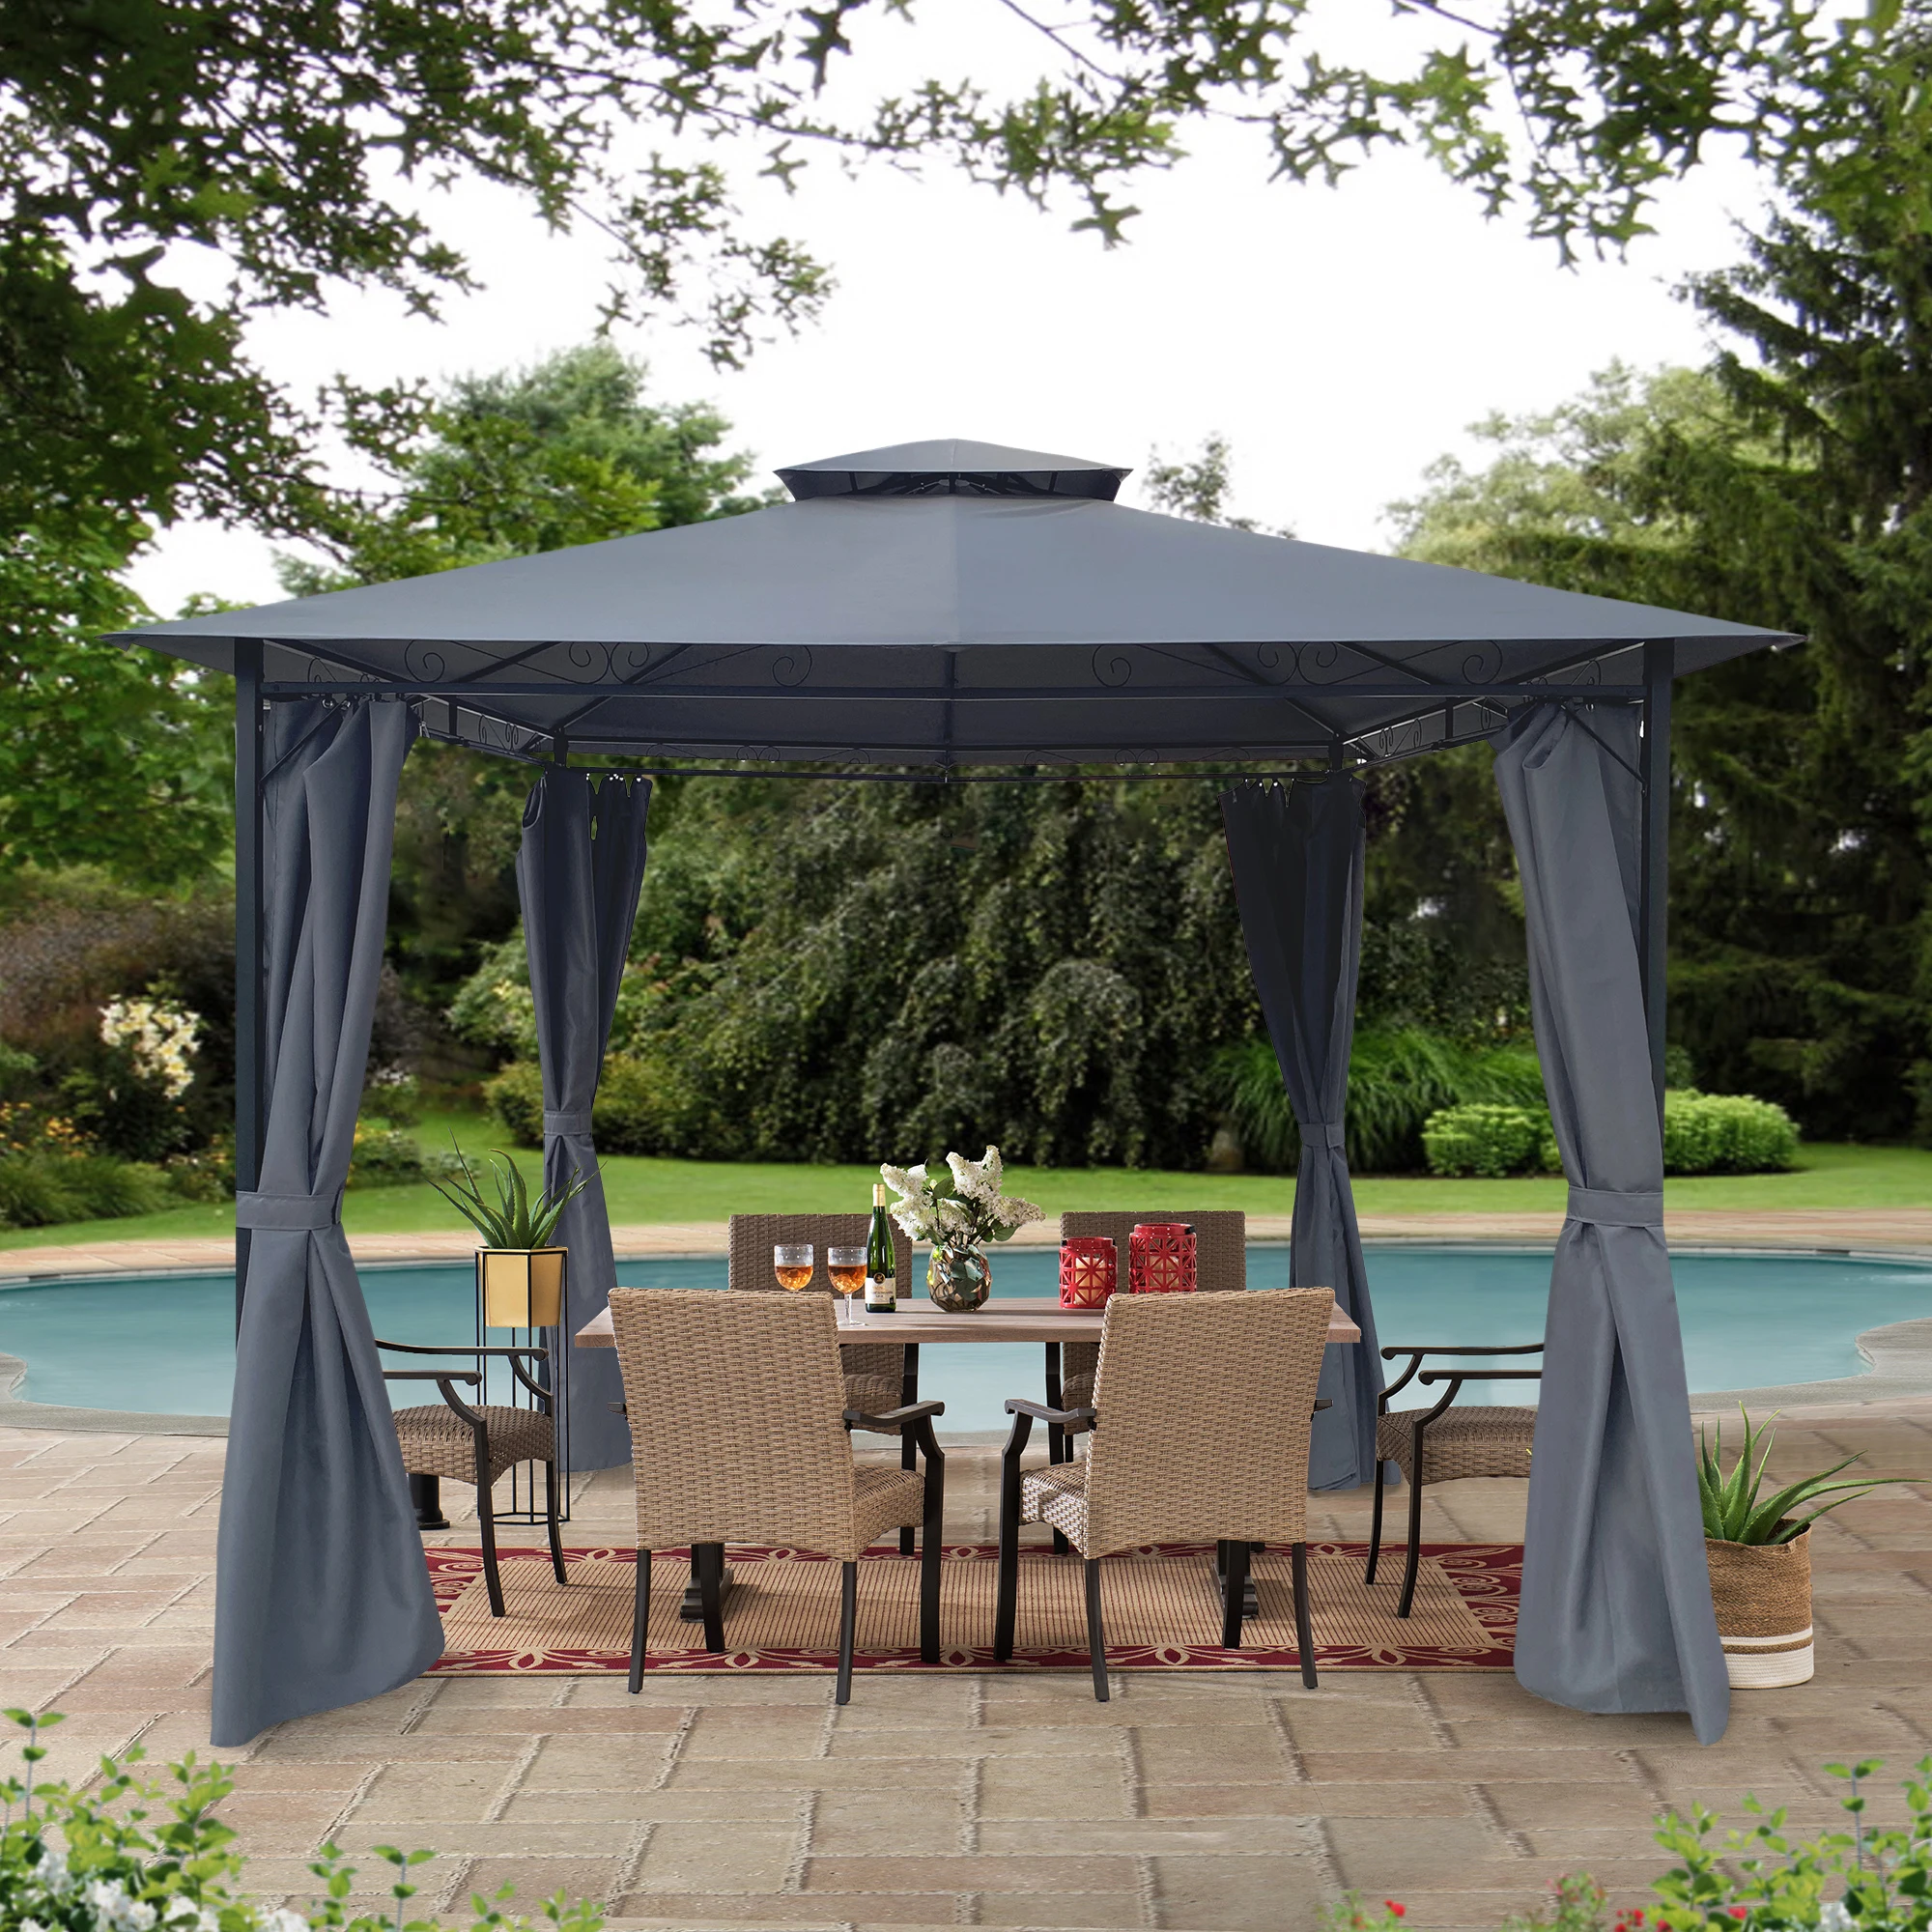 

10x10 Ft Outdoor Patio Garden Gazebo Tent With Curtains for Patio, Backyard, Deck, Lawns, Gray